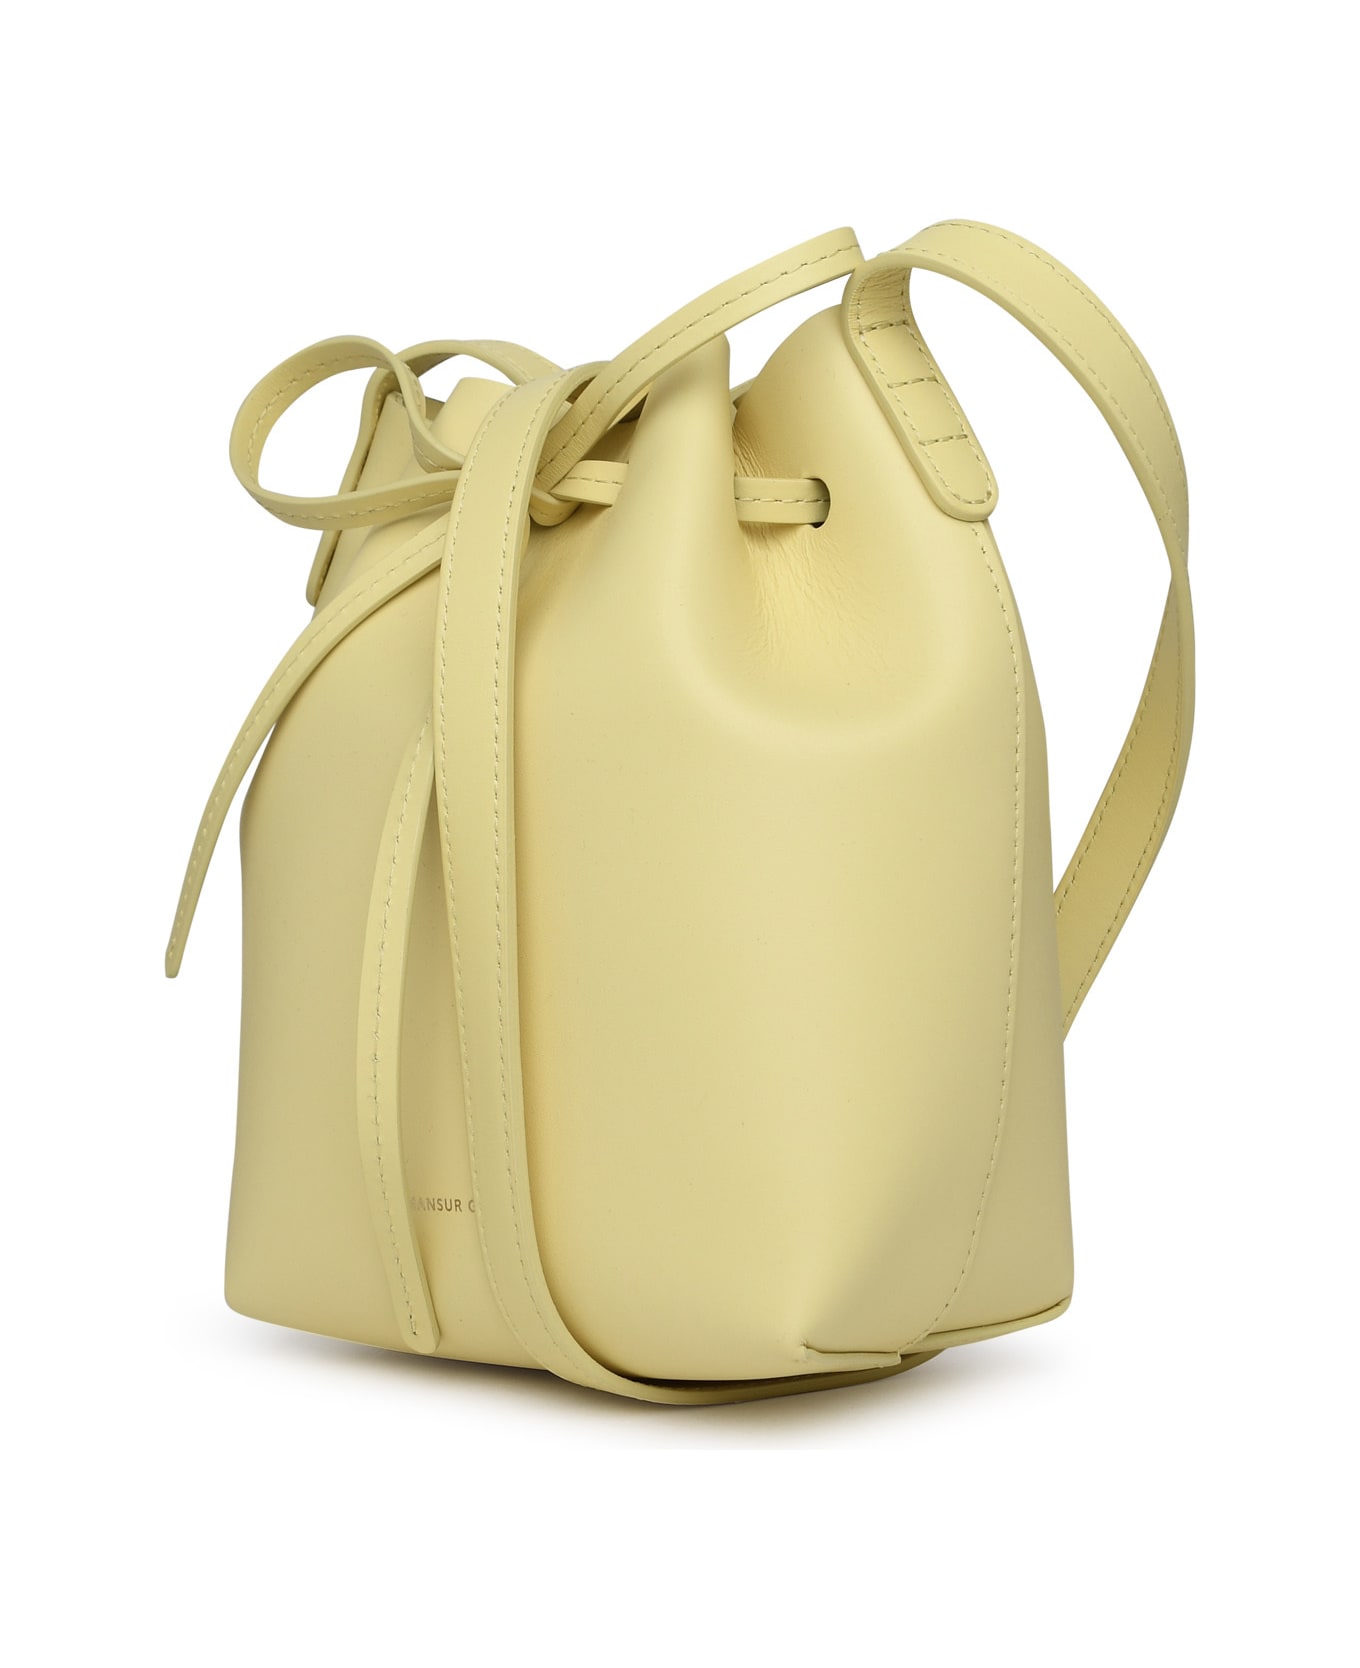 Mansur Gavriel Small Bucket Bag In Yellow Leather - Yellow トートバッグ